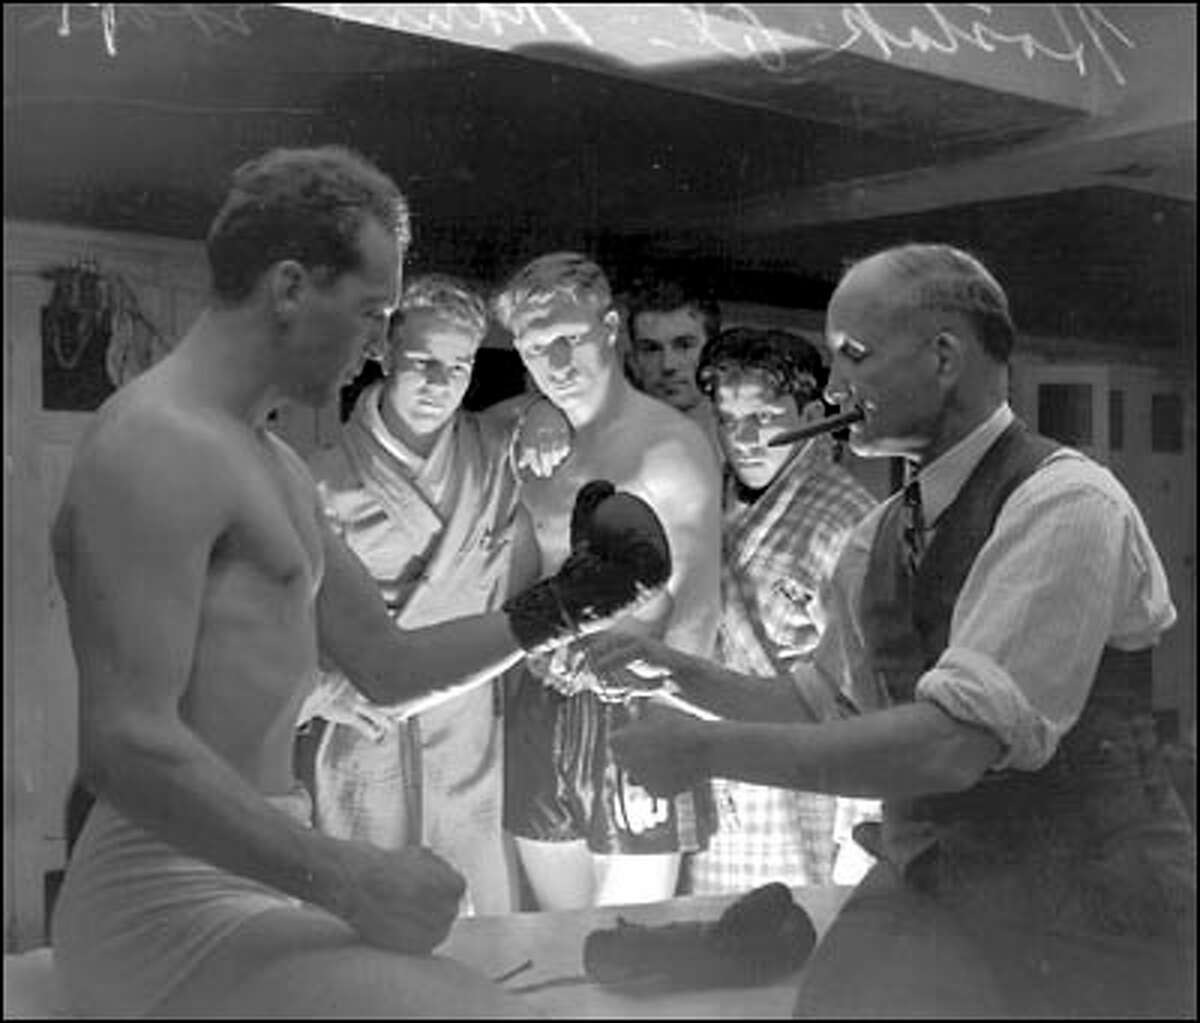 Cigar-chomping trainer Eddie Marino laces up a glove on middleweight titleholder Al Hostak for his Sept. 18, 1938 bout with Young Stuhly at Seattle's Civic Auditorium. Frank "Slim" Lynch lit the scene from below so that a ghostly light plays over the scene.